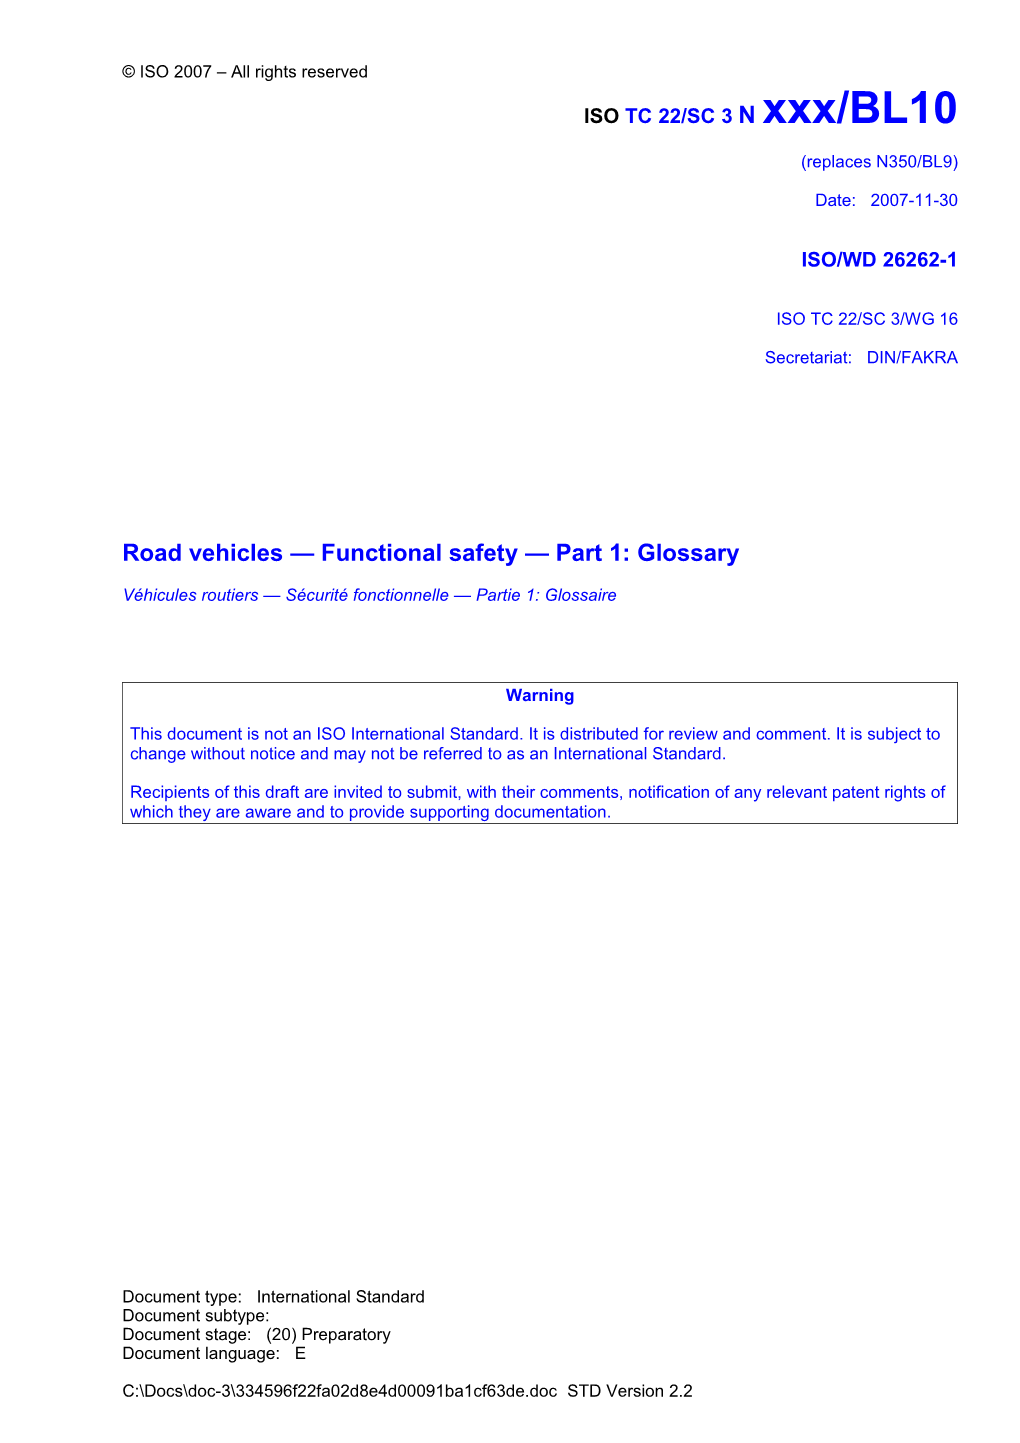 Road Vehicles Functional Safety Part1: Glossary